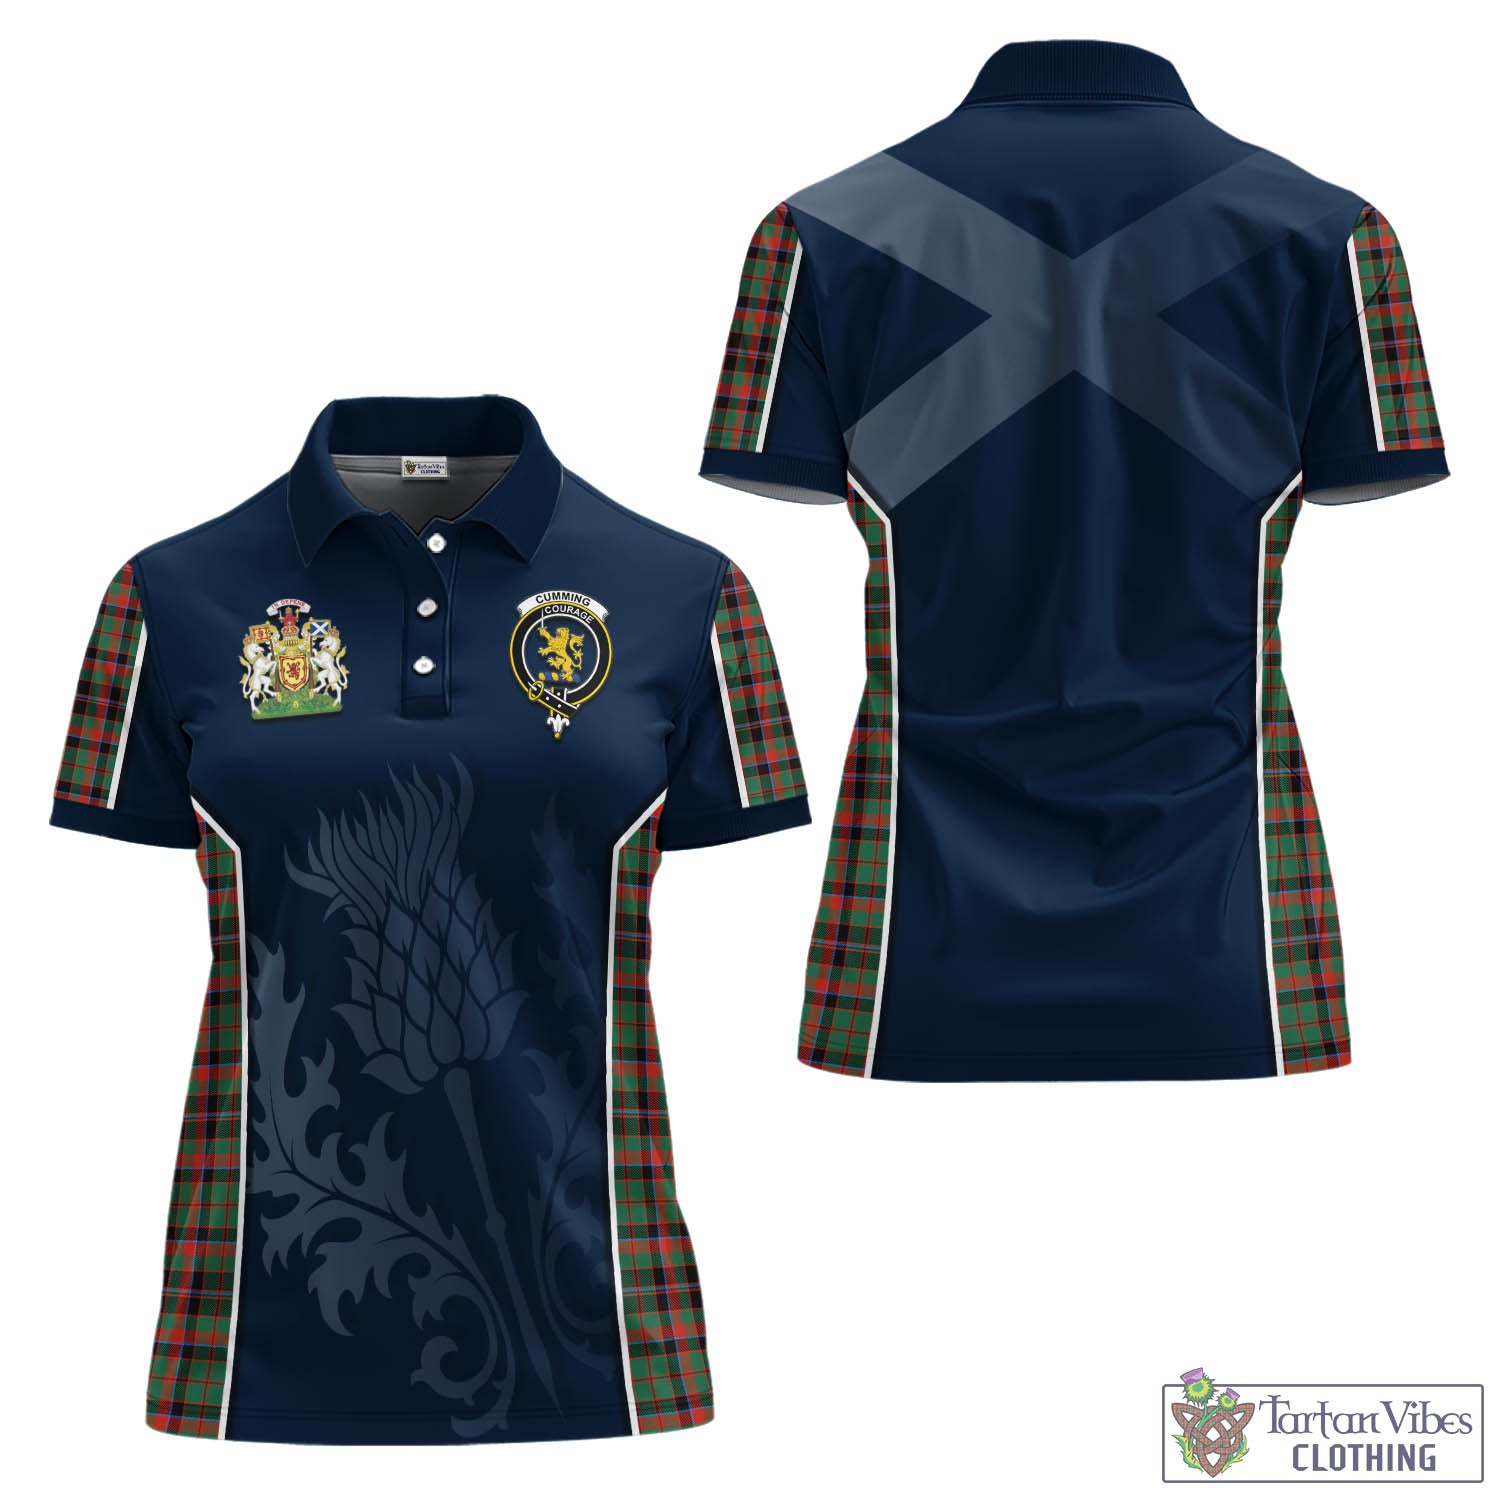 Tartan Vibes Clothing Cumming Hunting Ancient Tartan Women's Polo Shirt with Family Crest and Scottish Thistle Vibes Sport Style